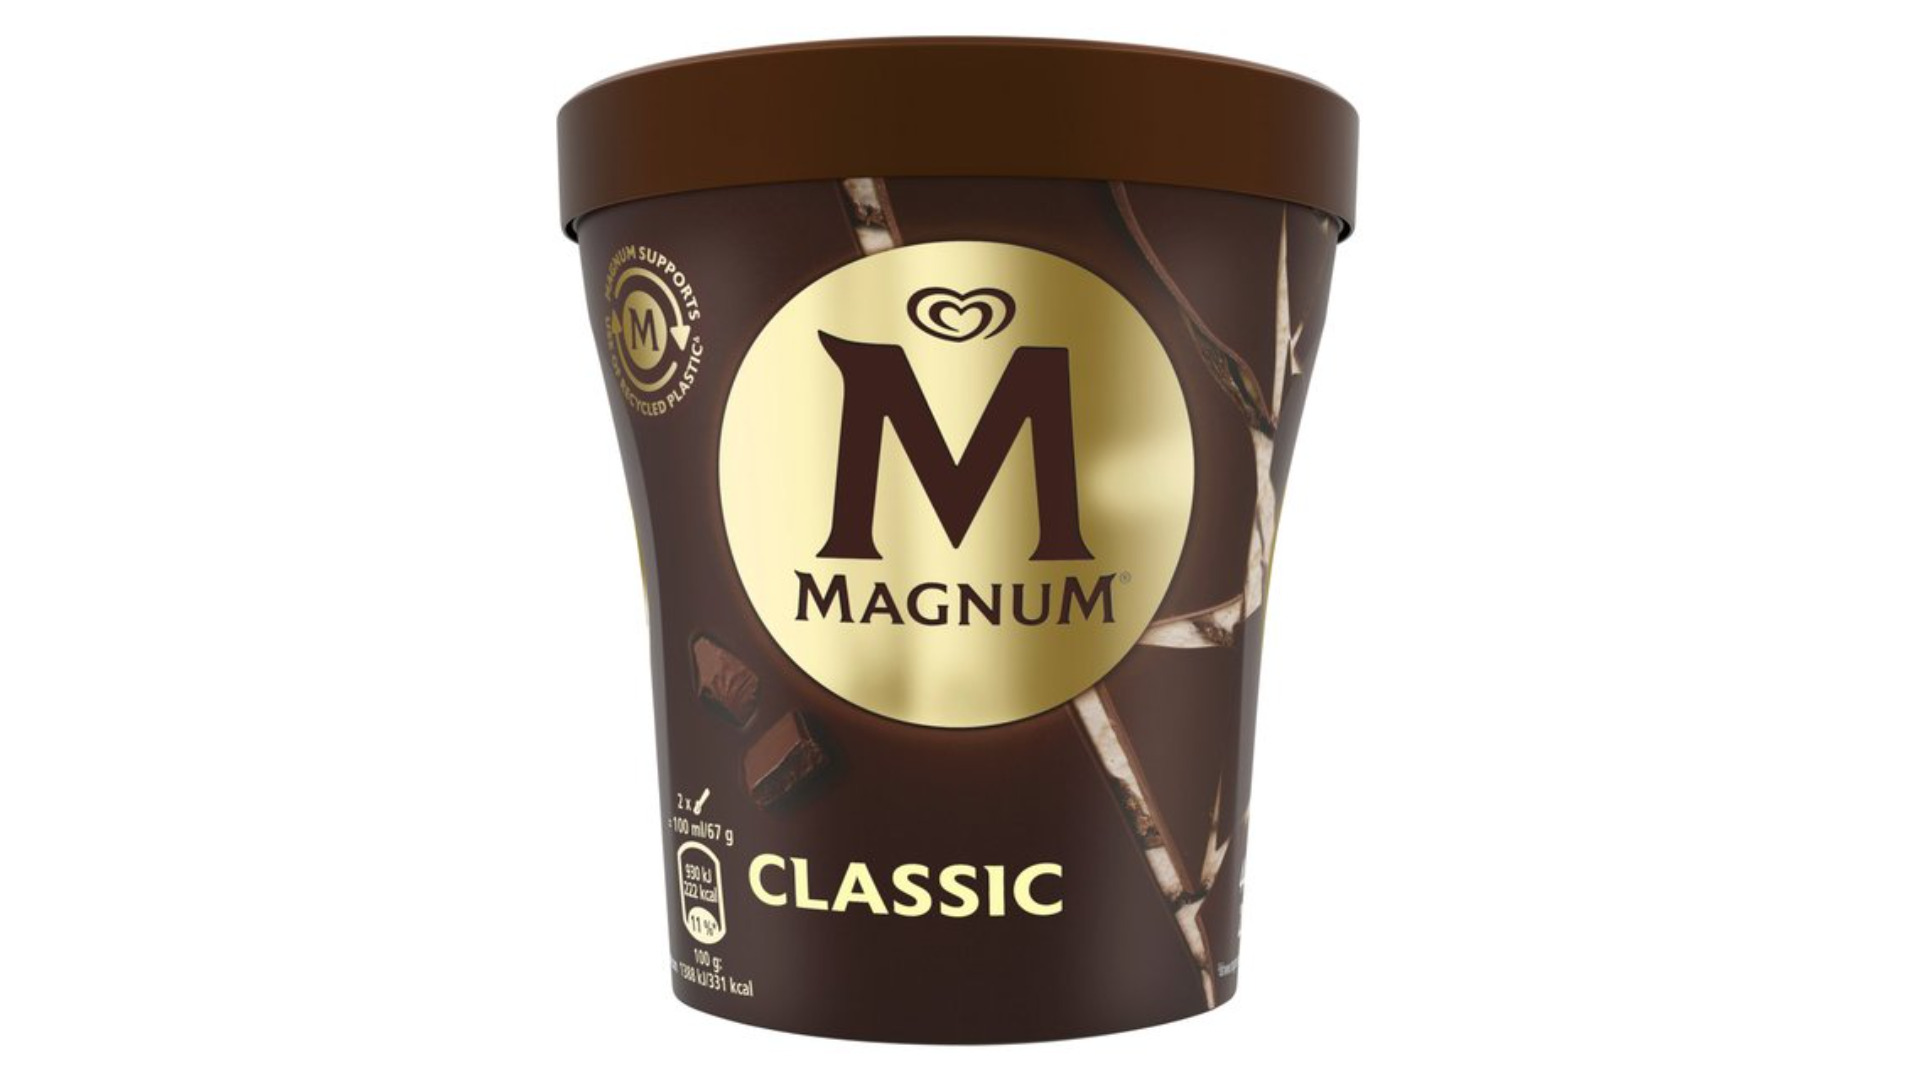 Magnum Tub Classic - Fried Chicken Delivery in Gants Hill IG2